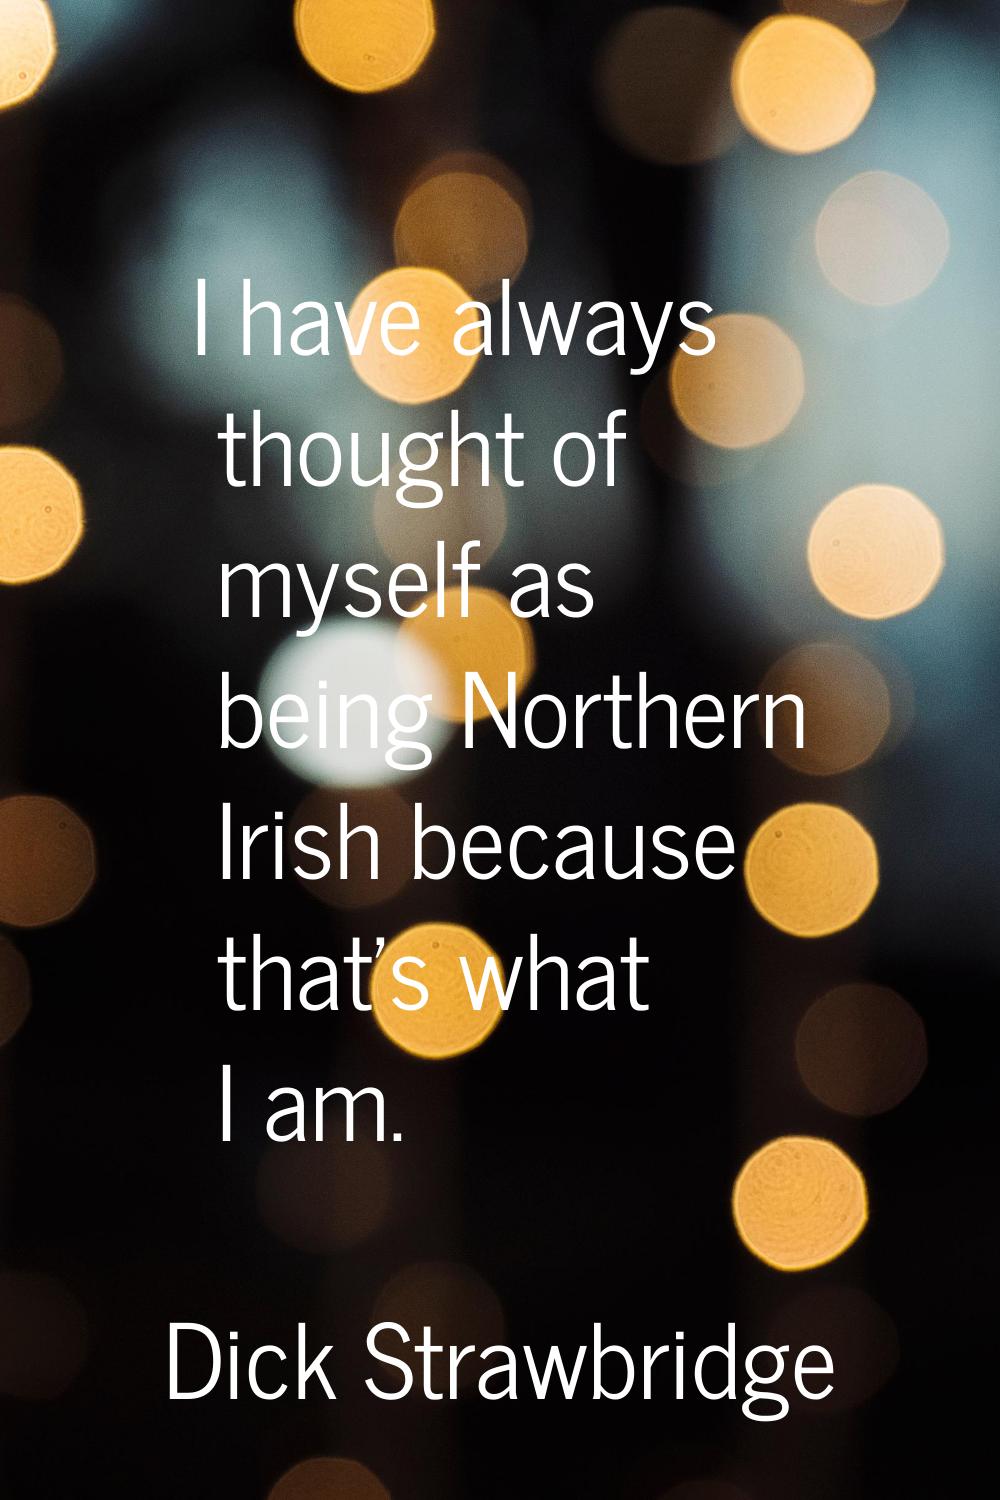 I have always thought of myself as being Northern Irish because that's what I am.